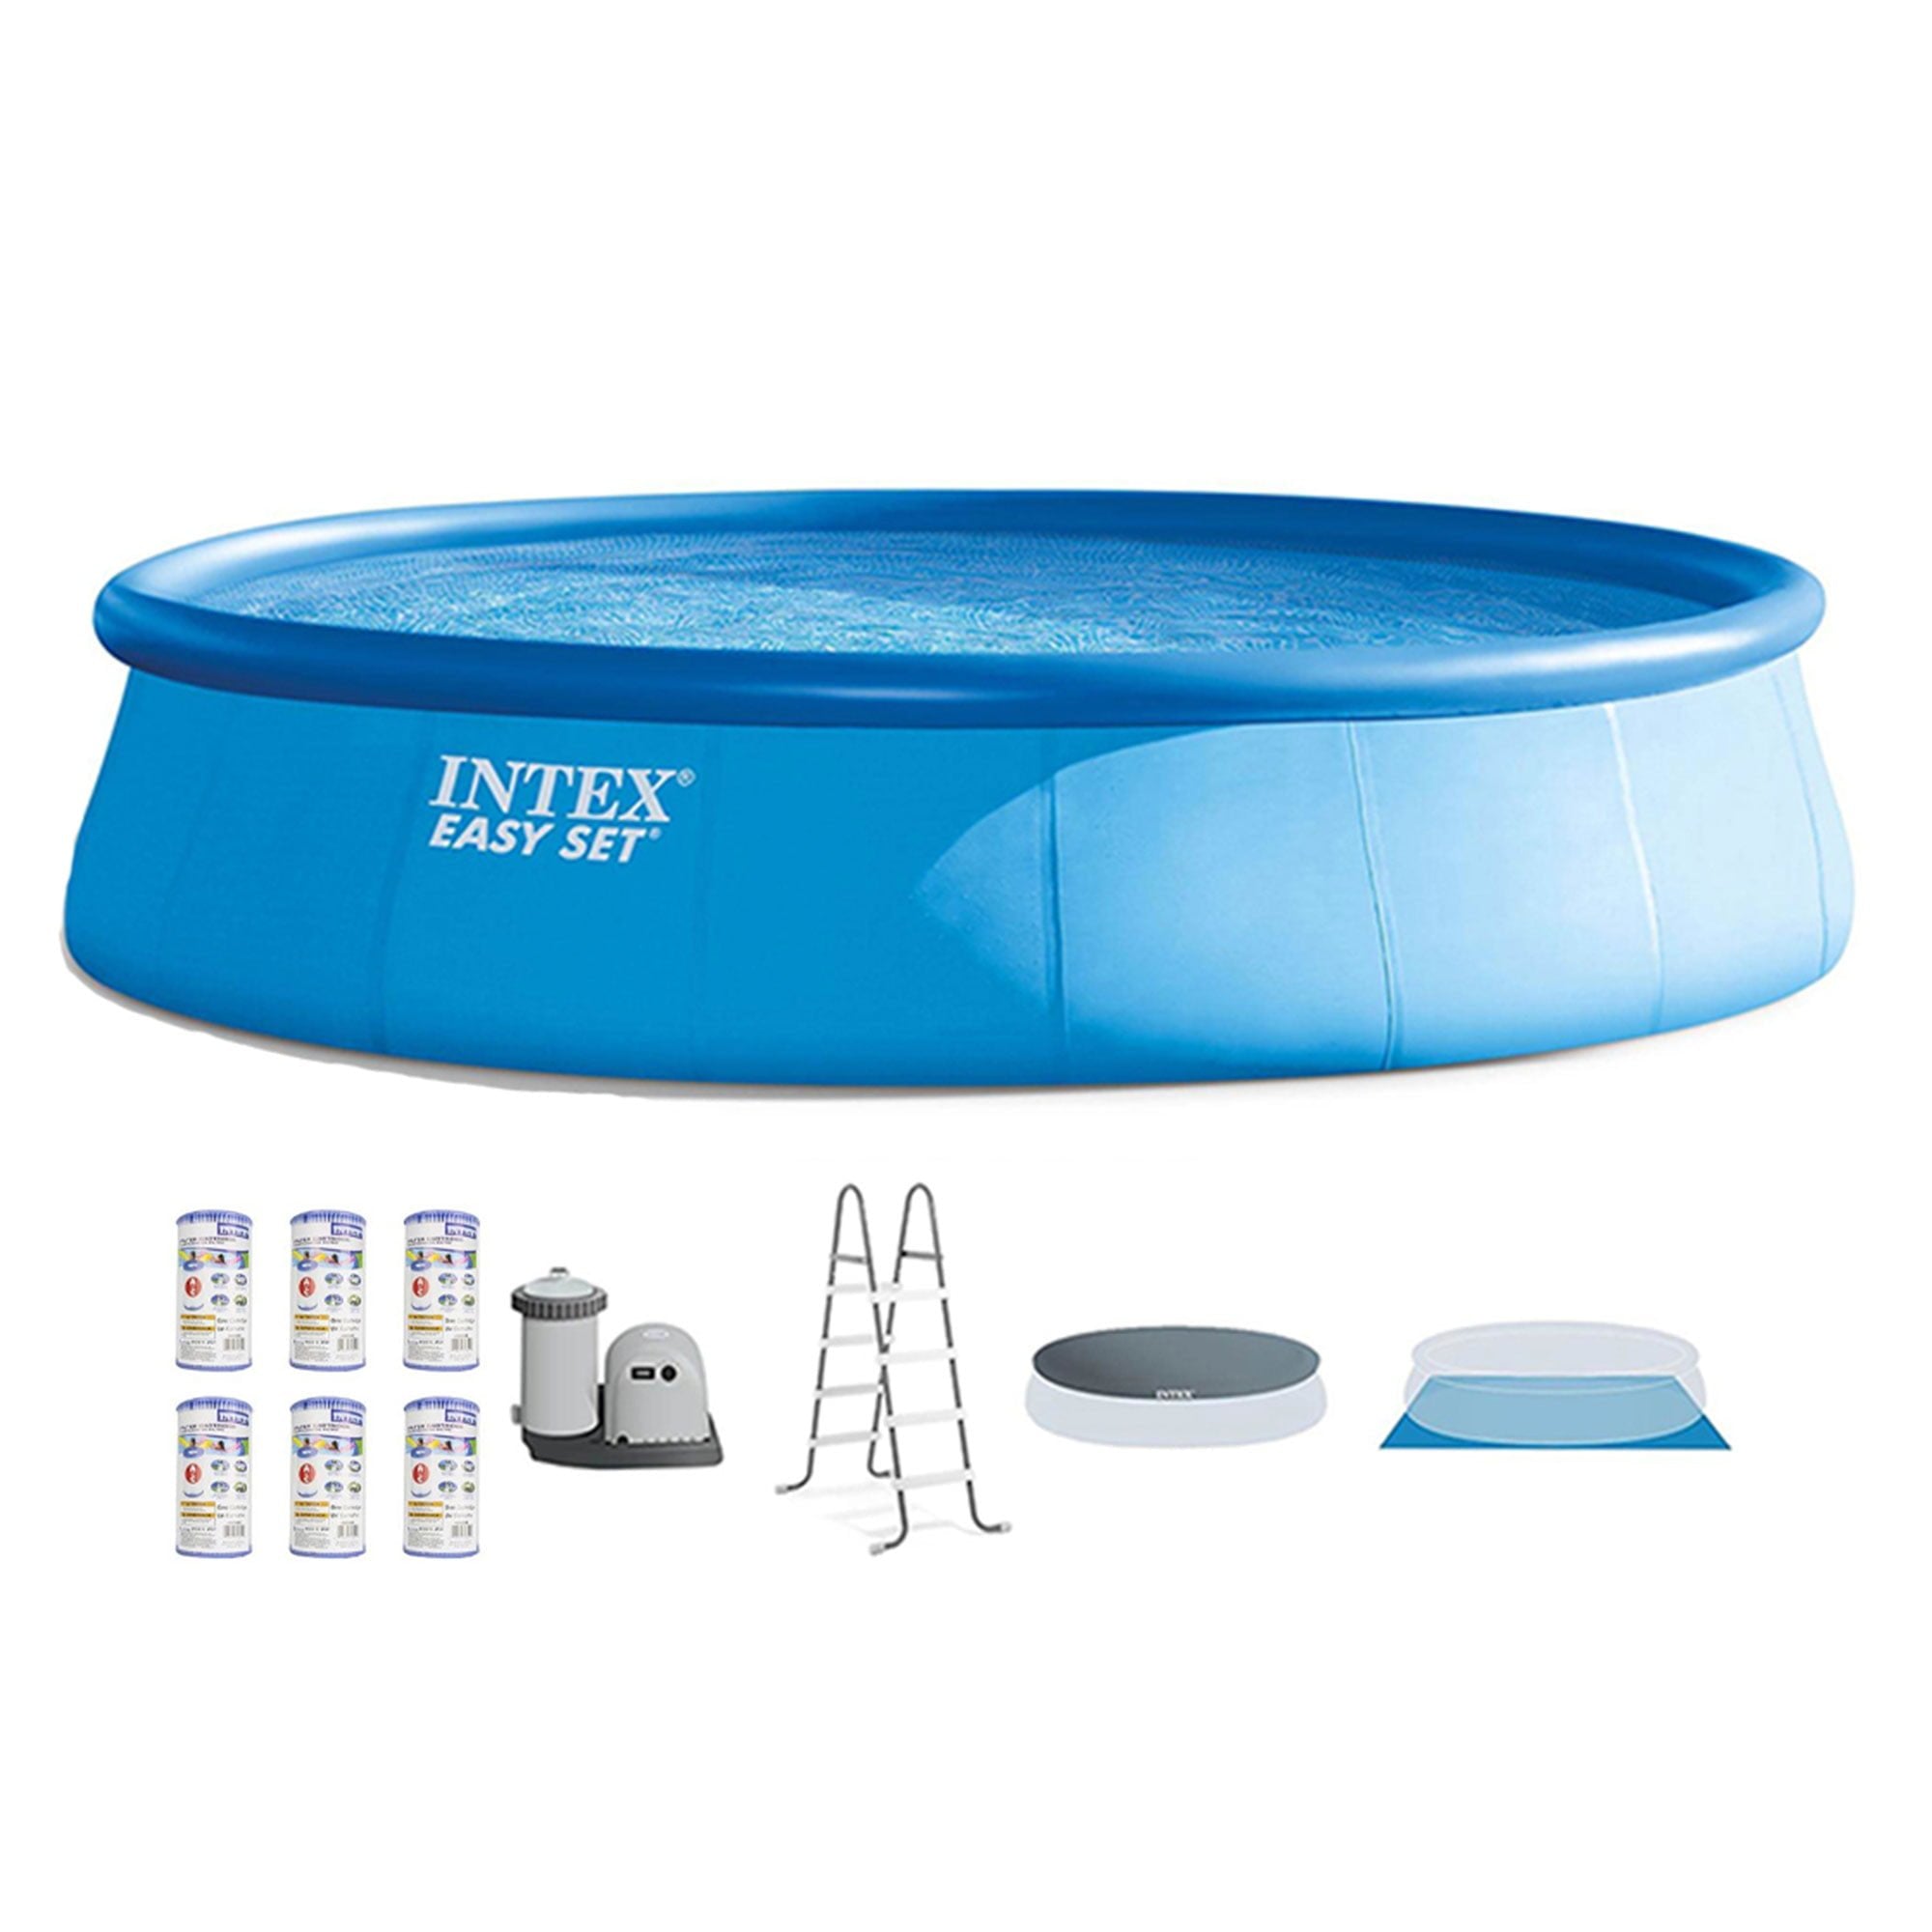 Intex 18' x 48" Inflatable Above Ground Round Outdoor Pool Set with Filter Cartridges (6 Pack) - Lucaneo